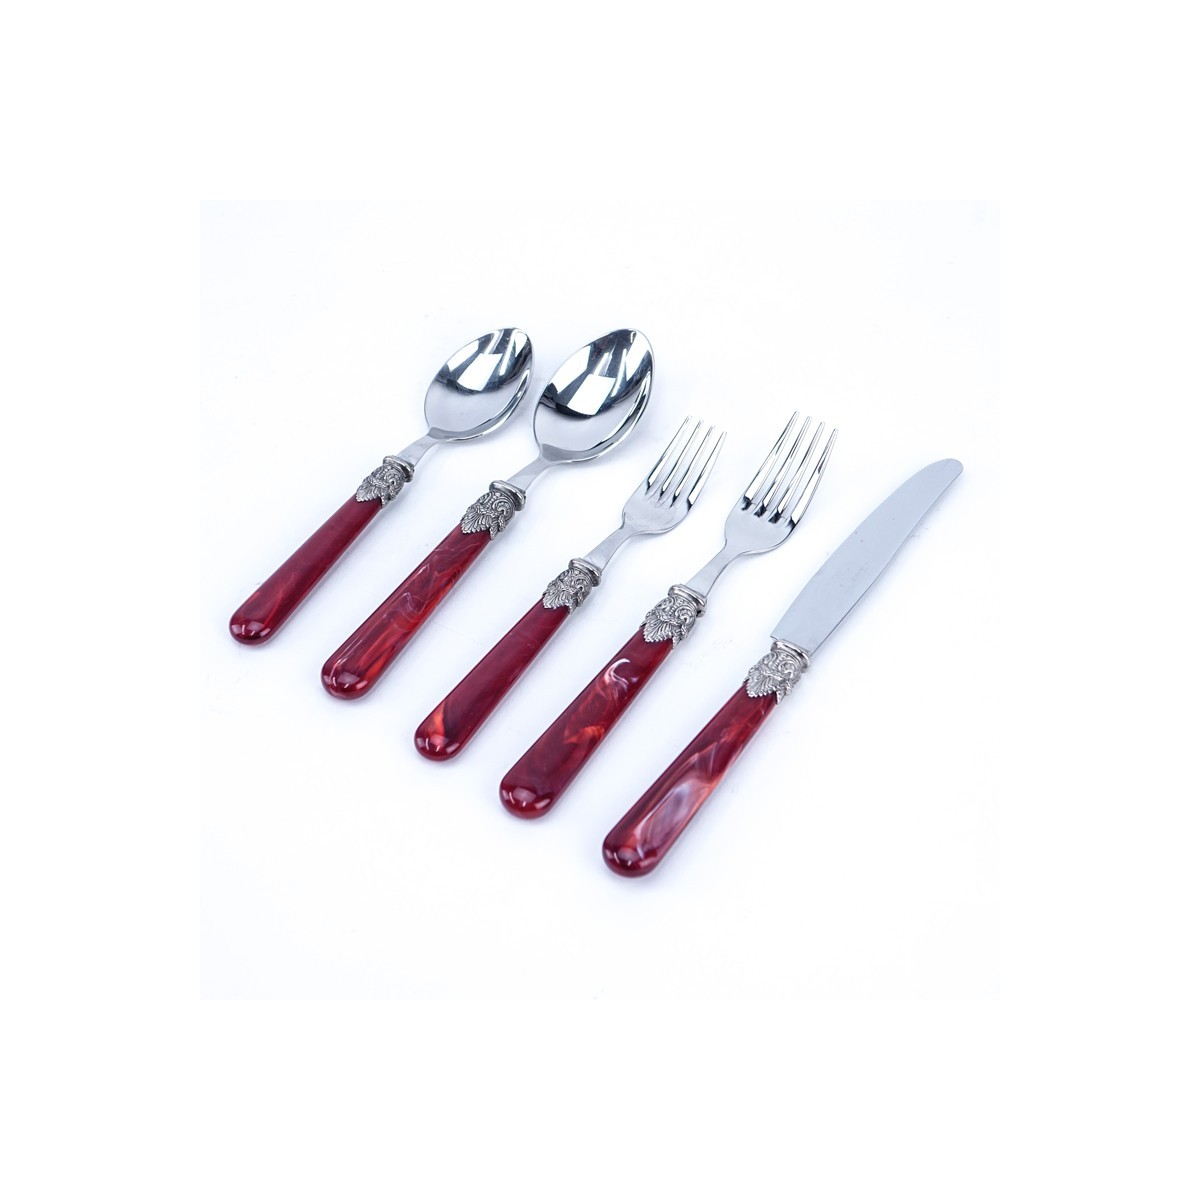 Sixty (60) Piece Italian EME Inox 18/10 Napoleon Pearlized Handle and Stainless Steel Flatware. Includes: 12 dinner forks 7-7/8", 12 salad forks 7", 12 tablespoons 7-3/4", 12 tea spoons 7", 12 knives.